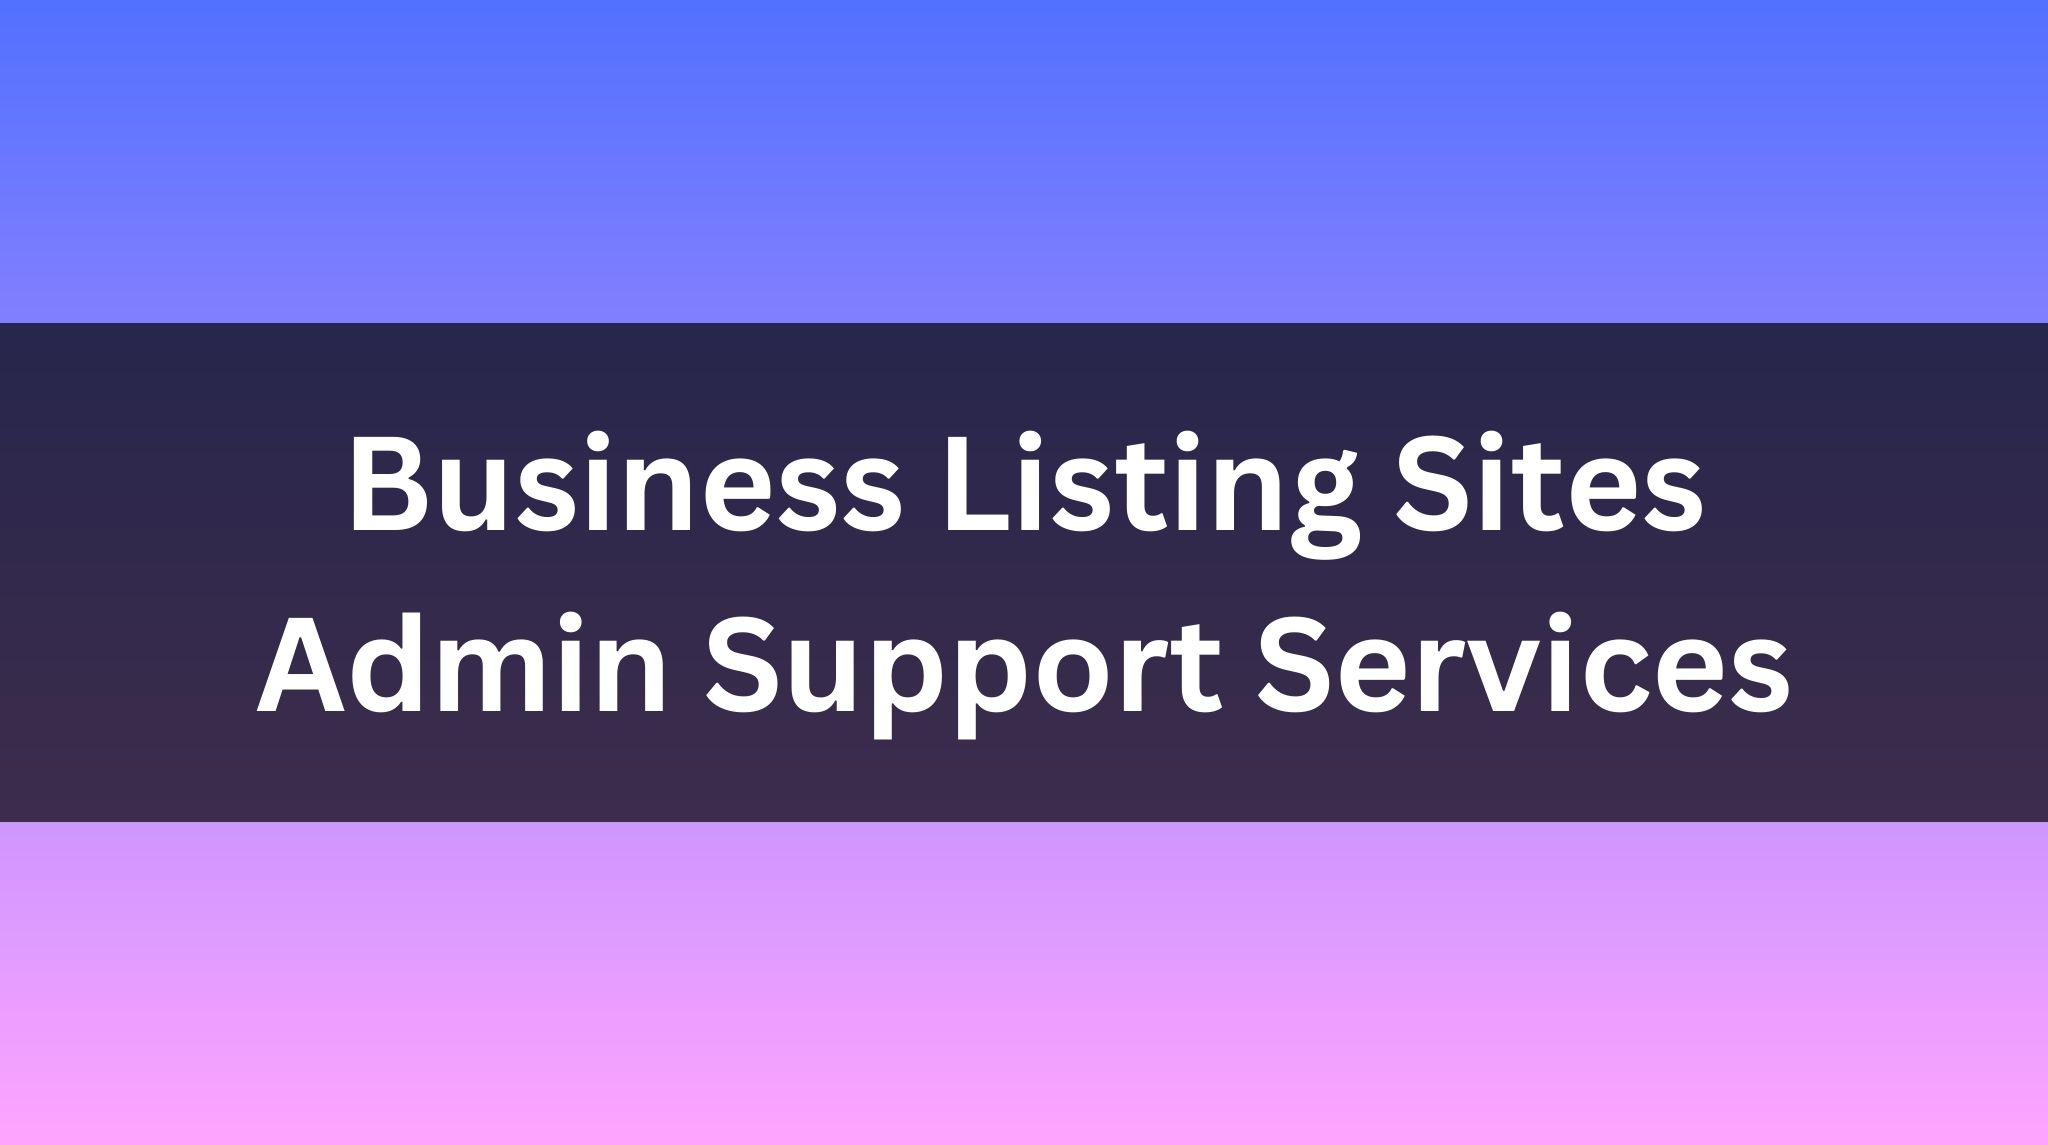 Business Listing Sites for Admin Support Services